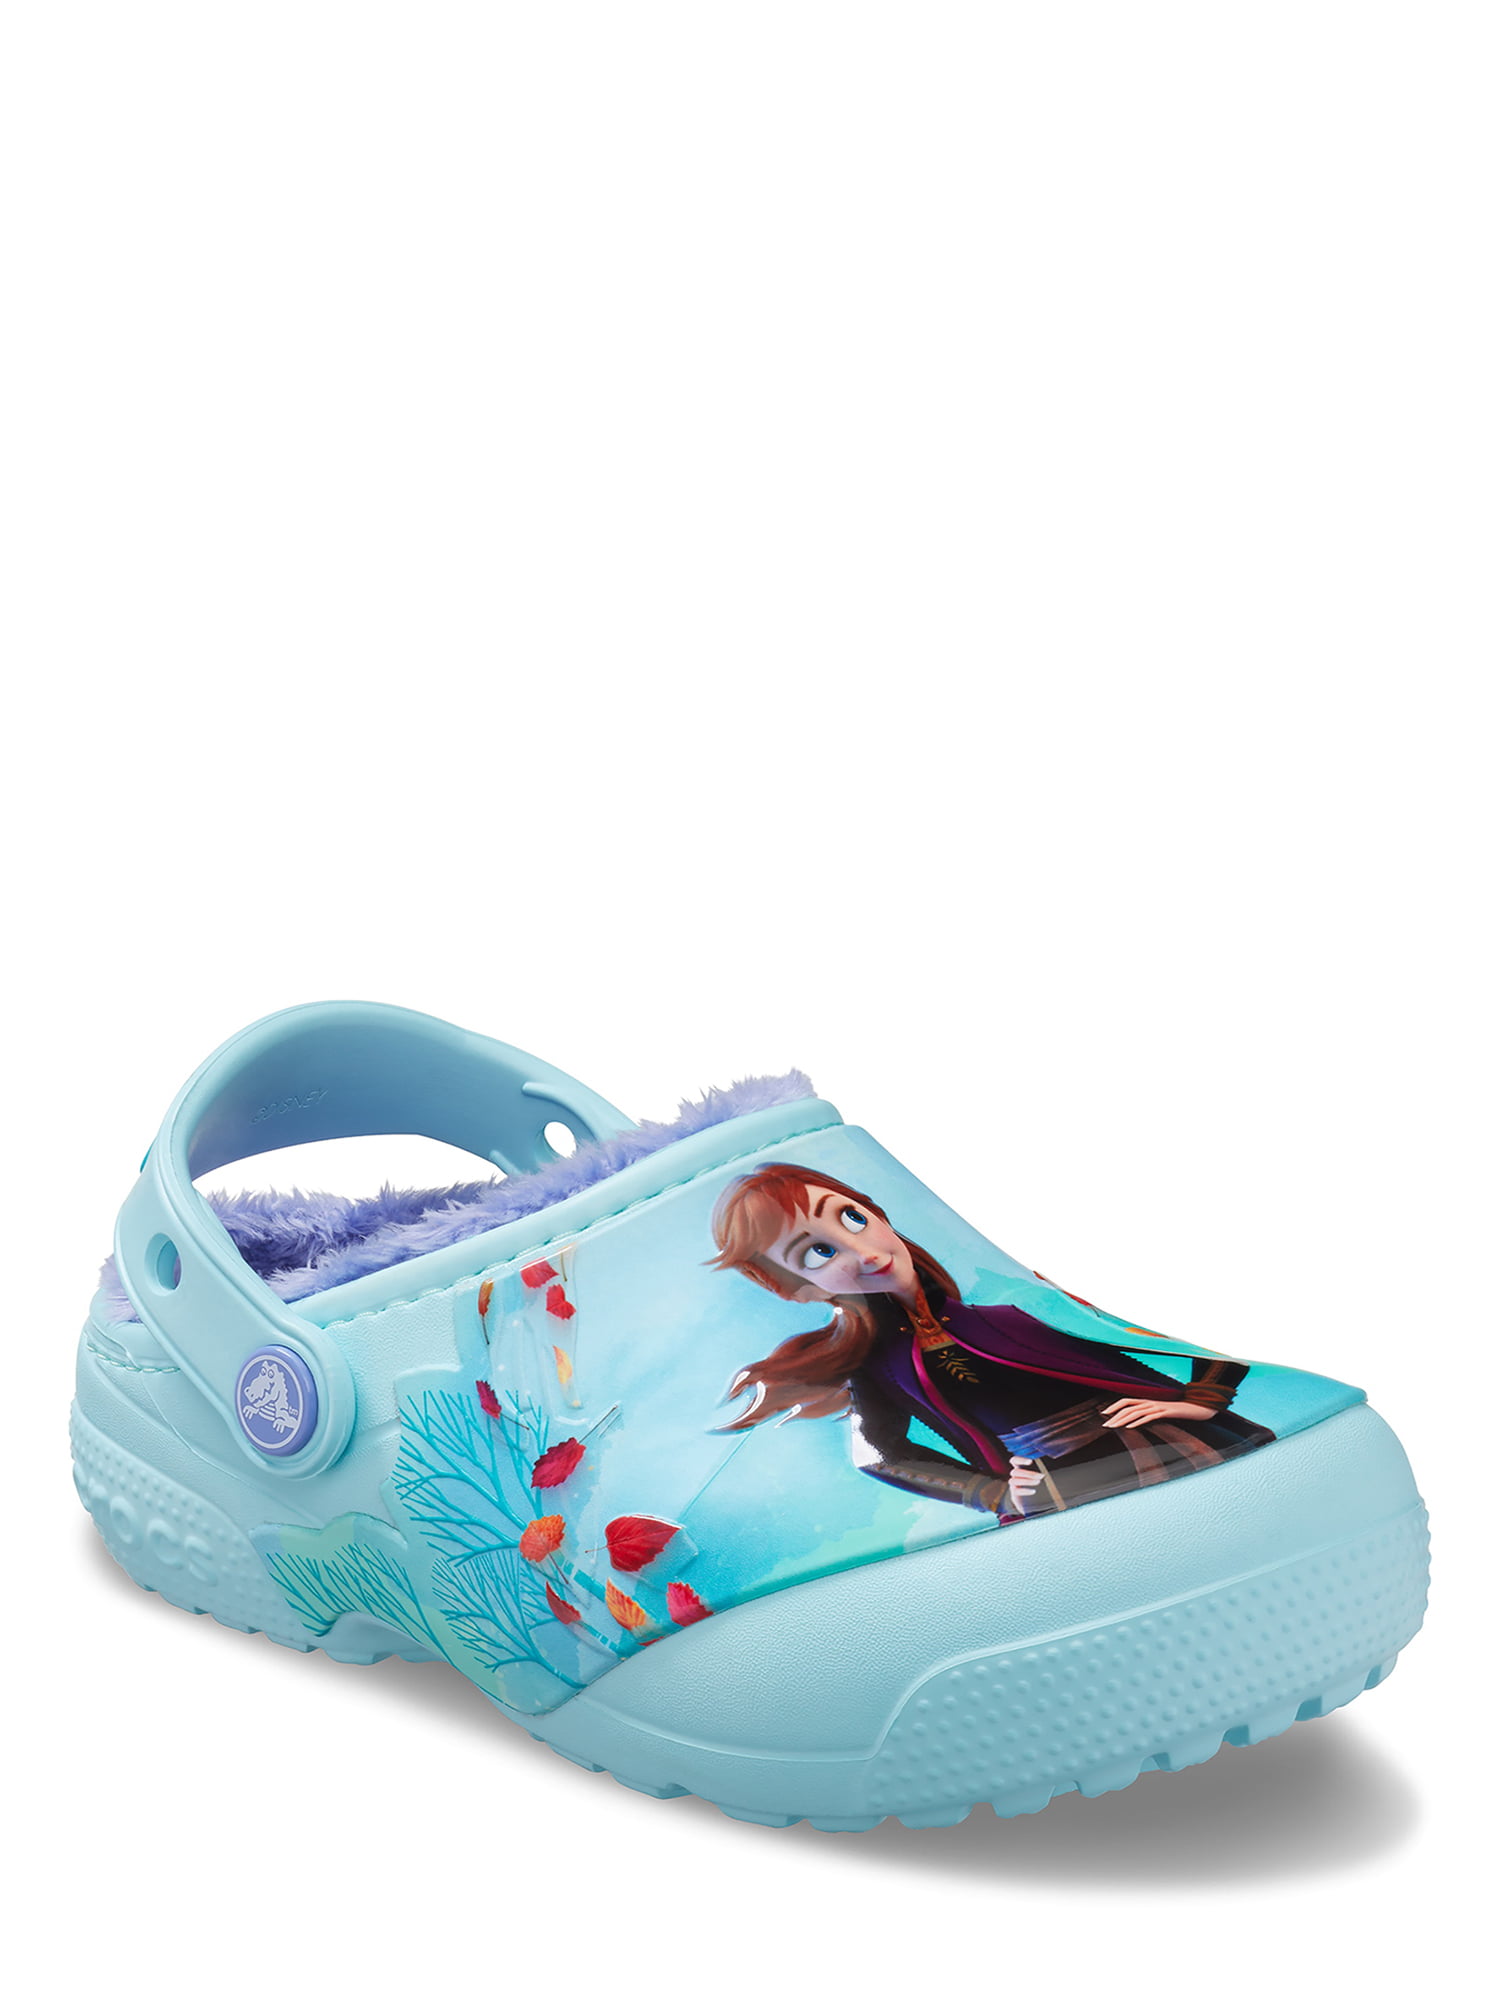 Crocs Girl's Child FunLab Frozen 2 Lined Clogs Ages